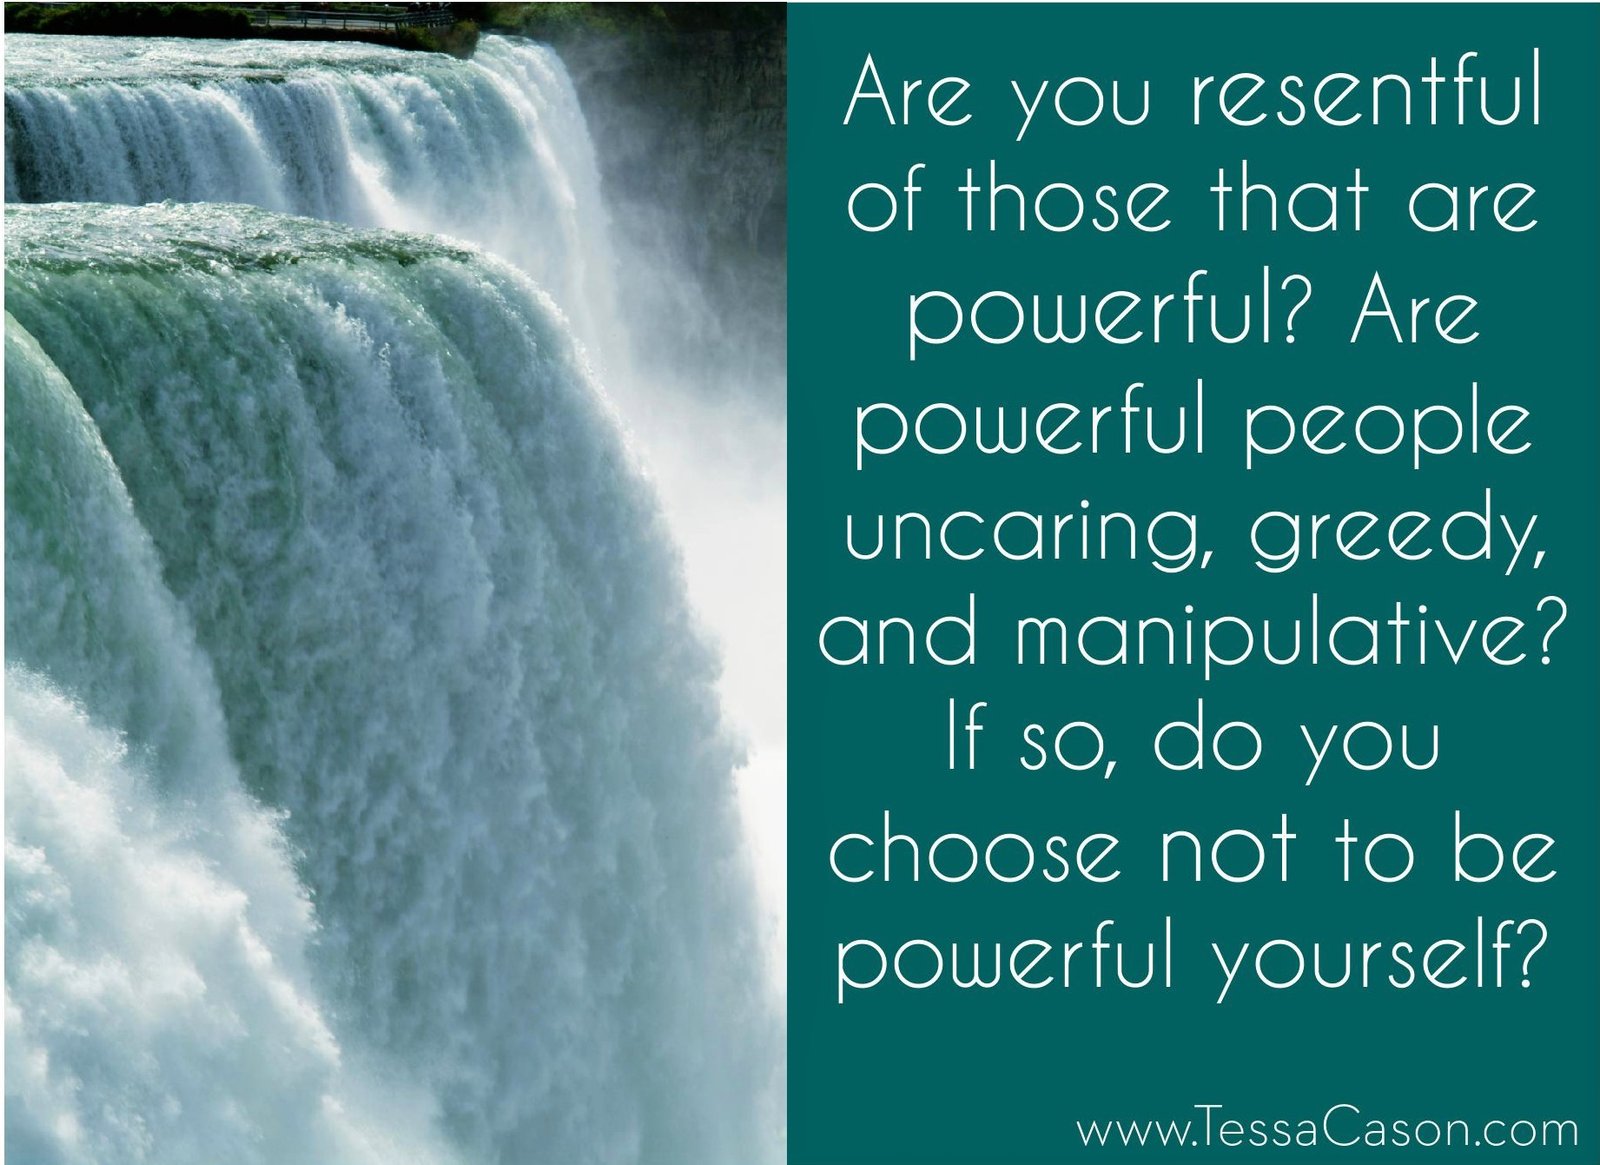 Are you resentful of powerful people